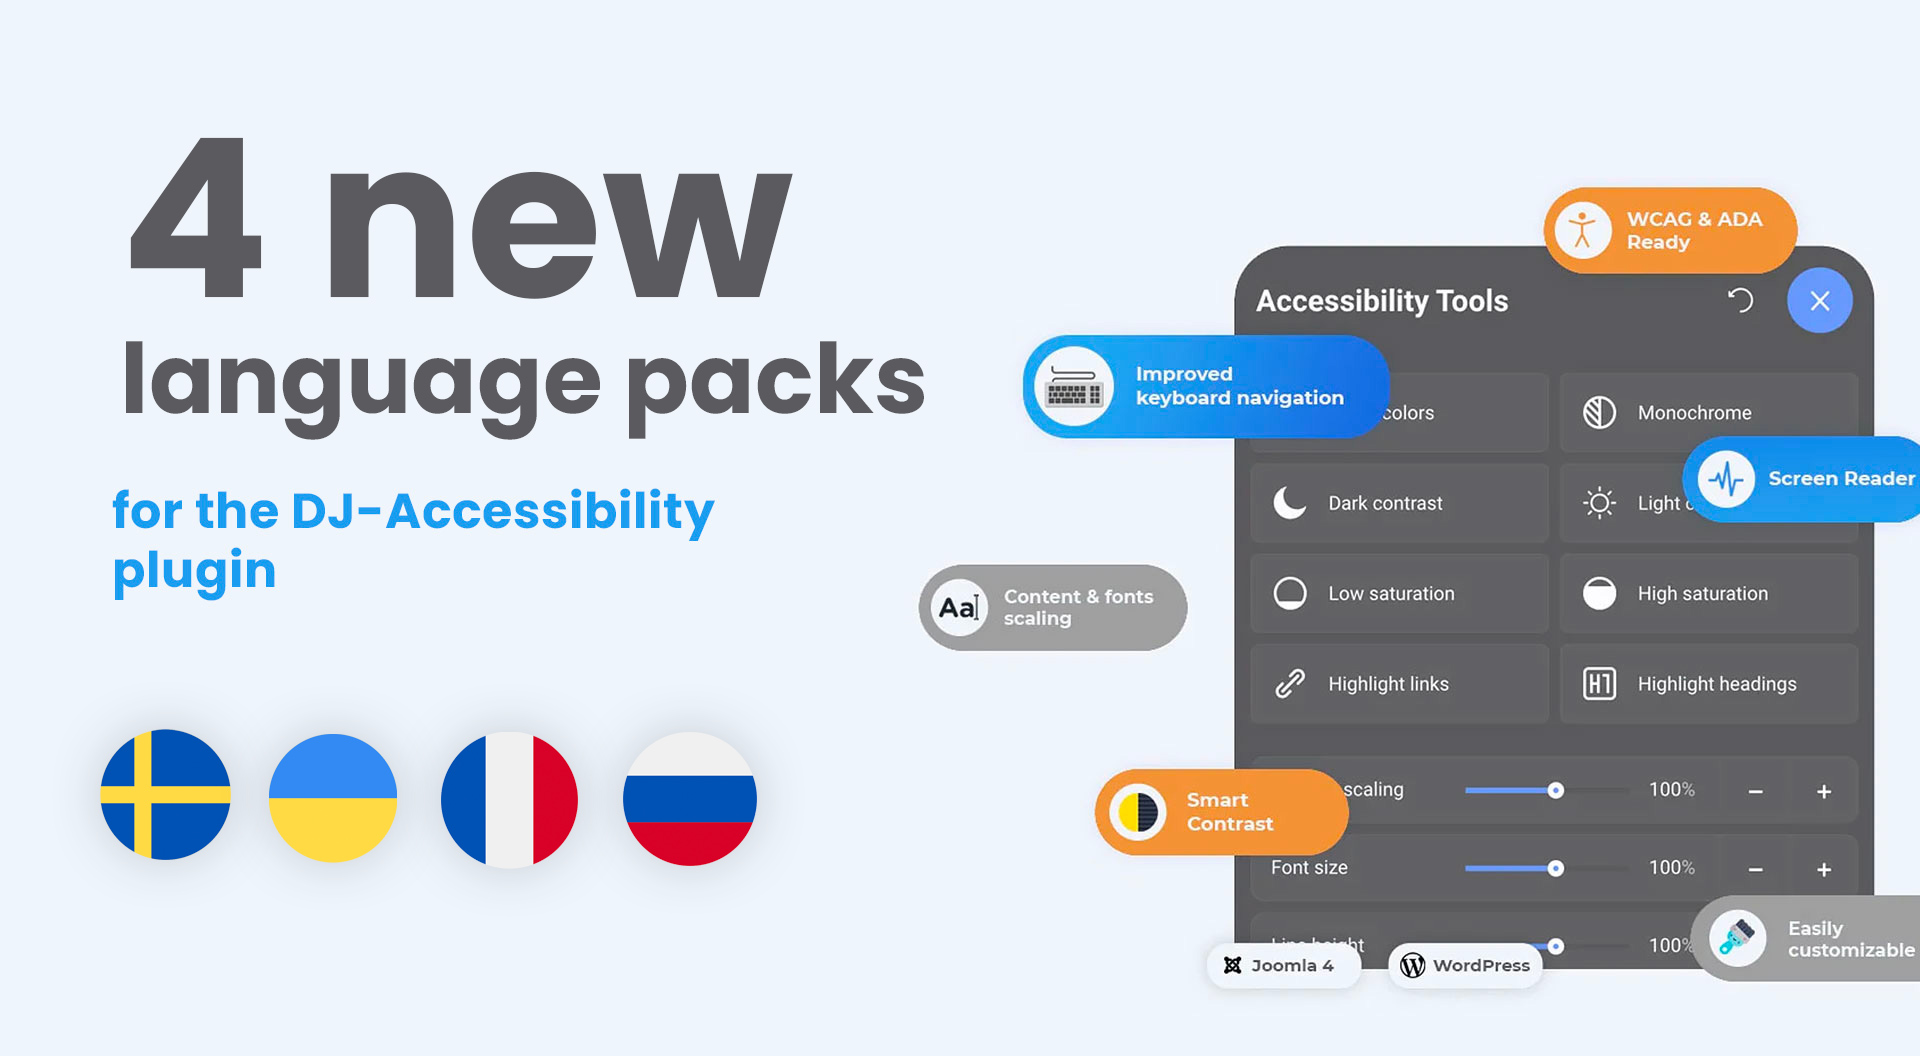 4-new-language-packs-for-dj-accessibility